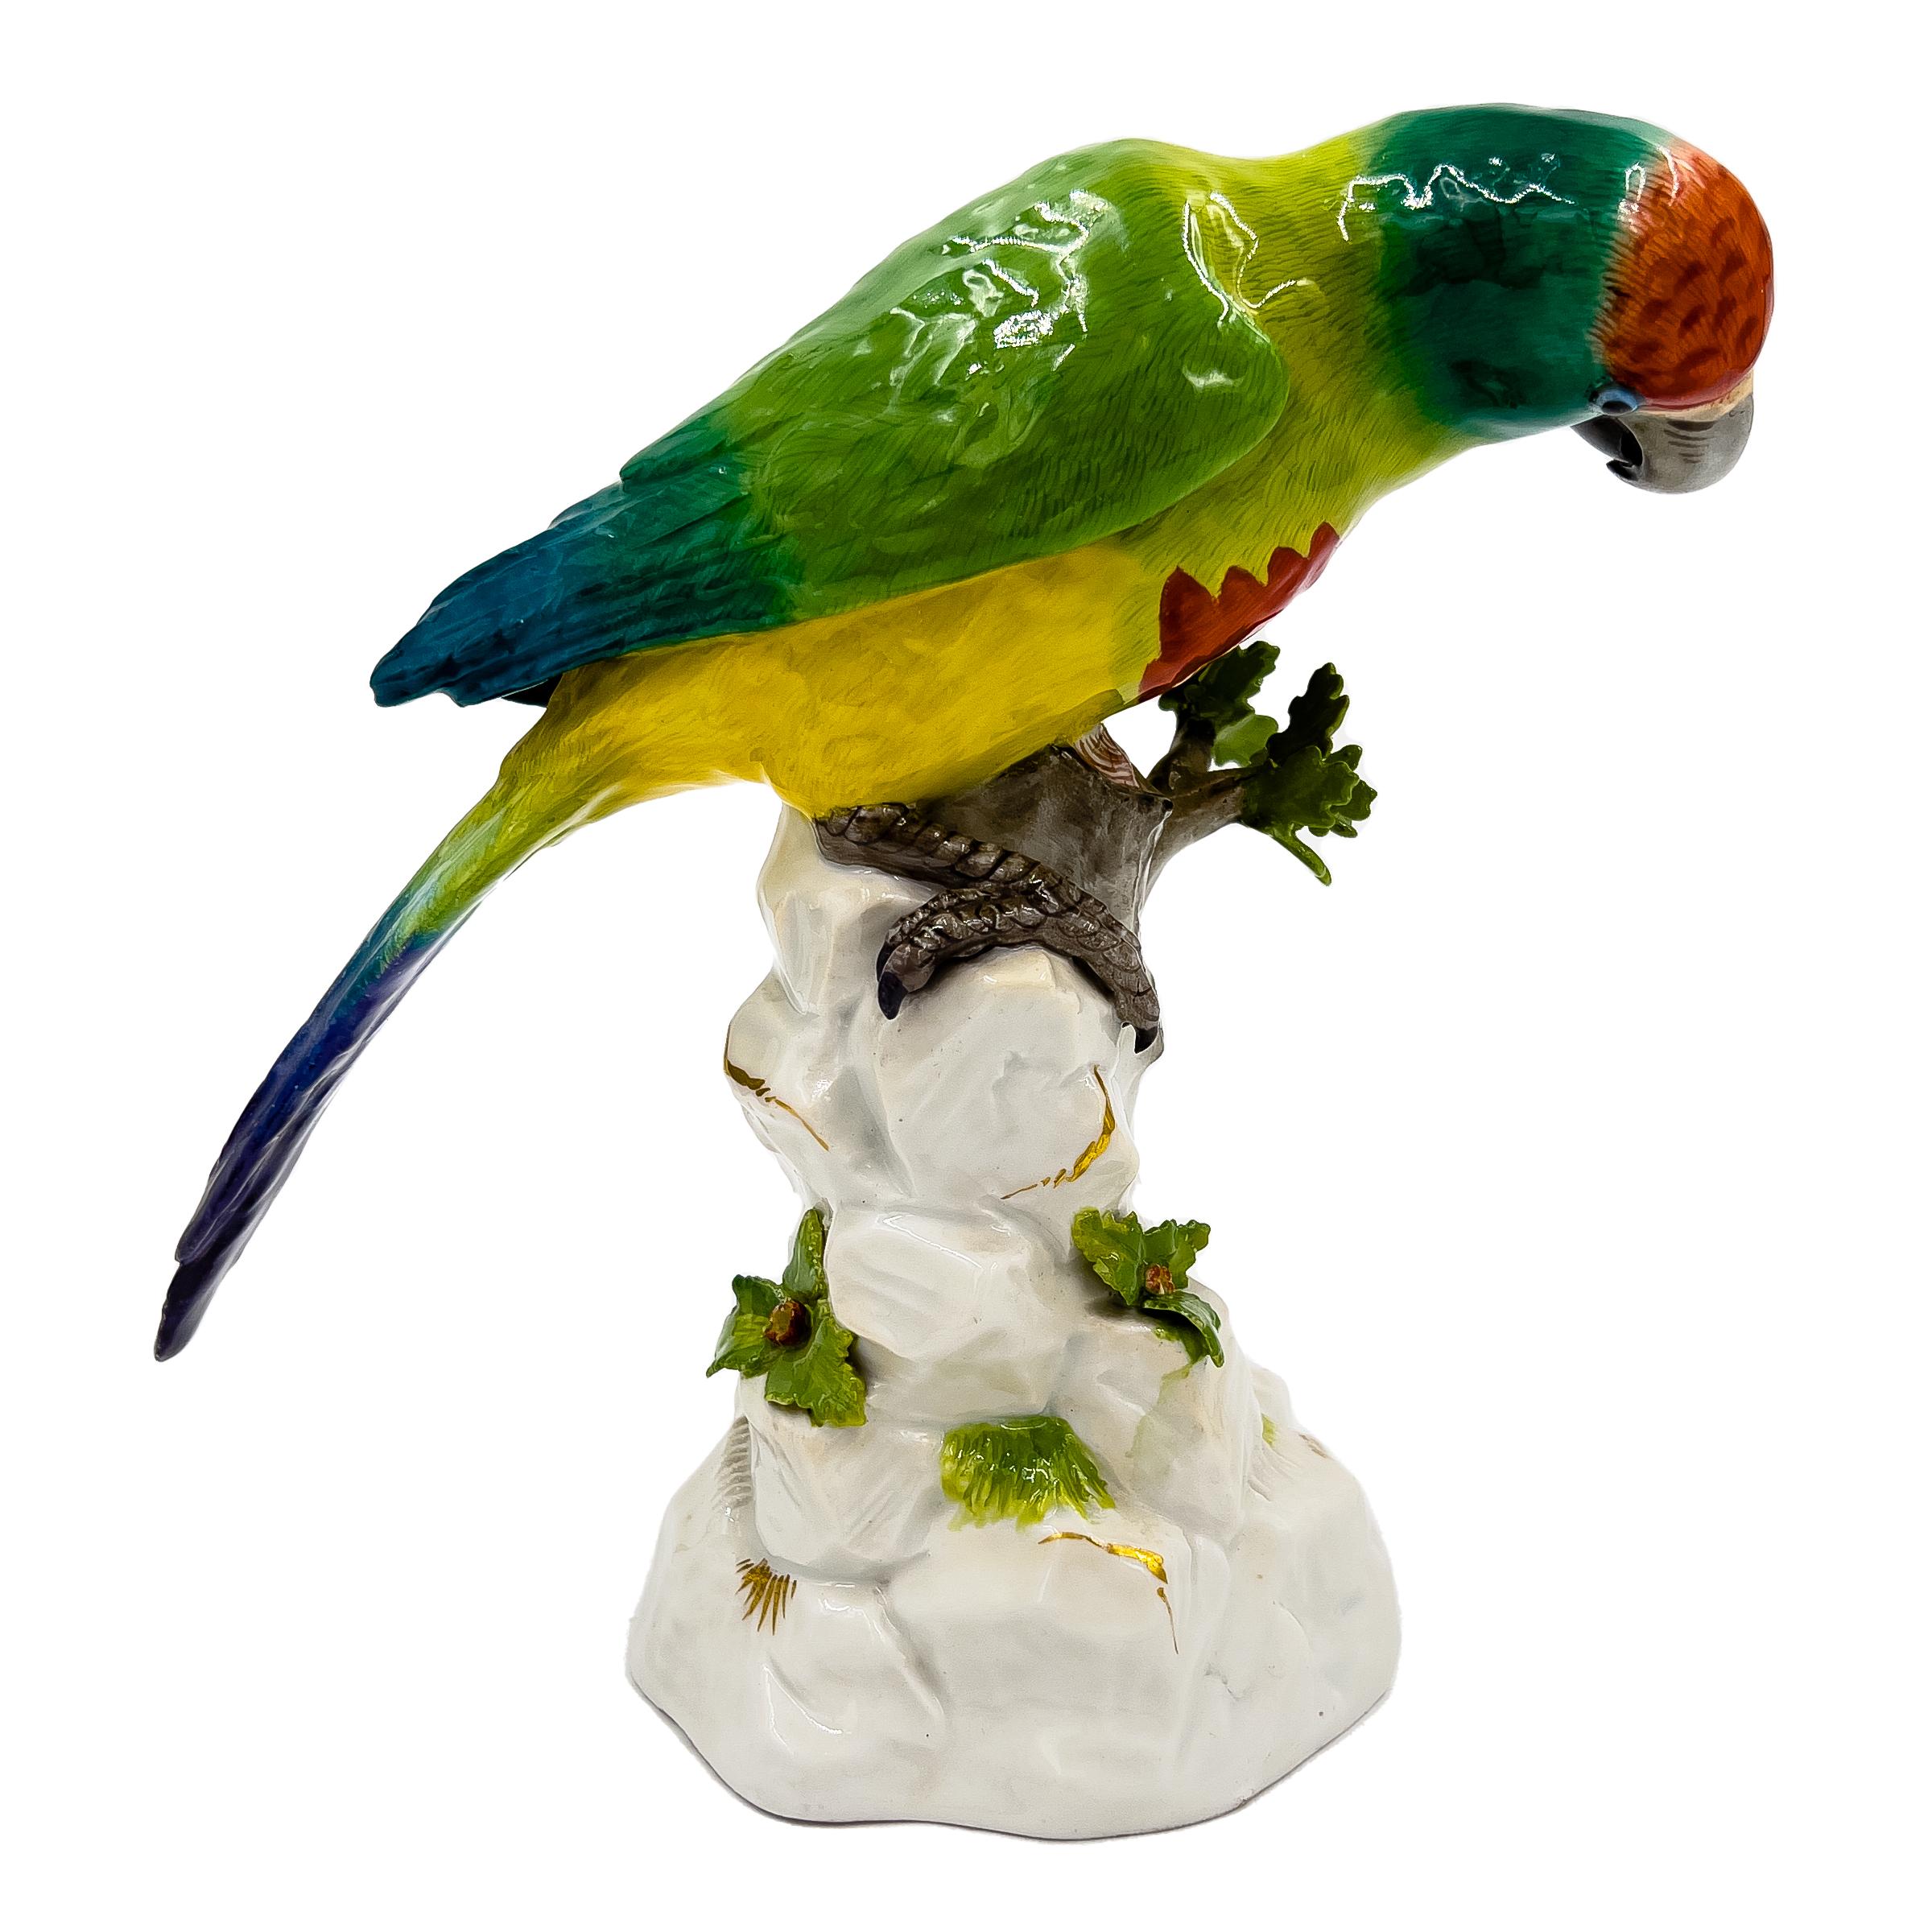 19th century Meissen Parrot on a tree sculpture, expertly crafted with realistic details. This multi-colored masterpiece features the parrot perched on a tree adorned with vibrant flowers and leaves, with the iconic Meissen signature proudly